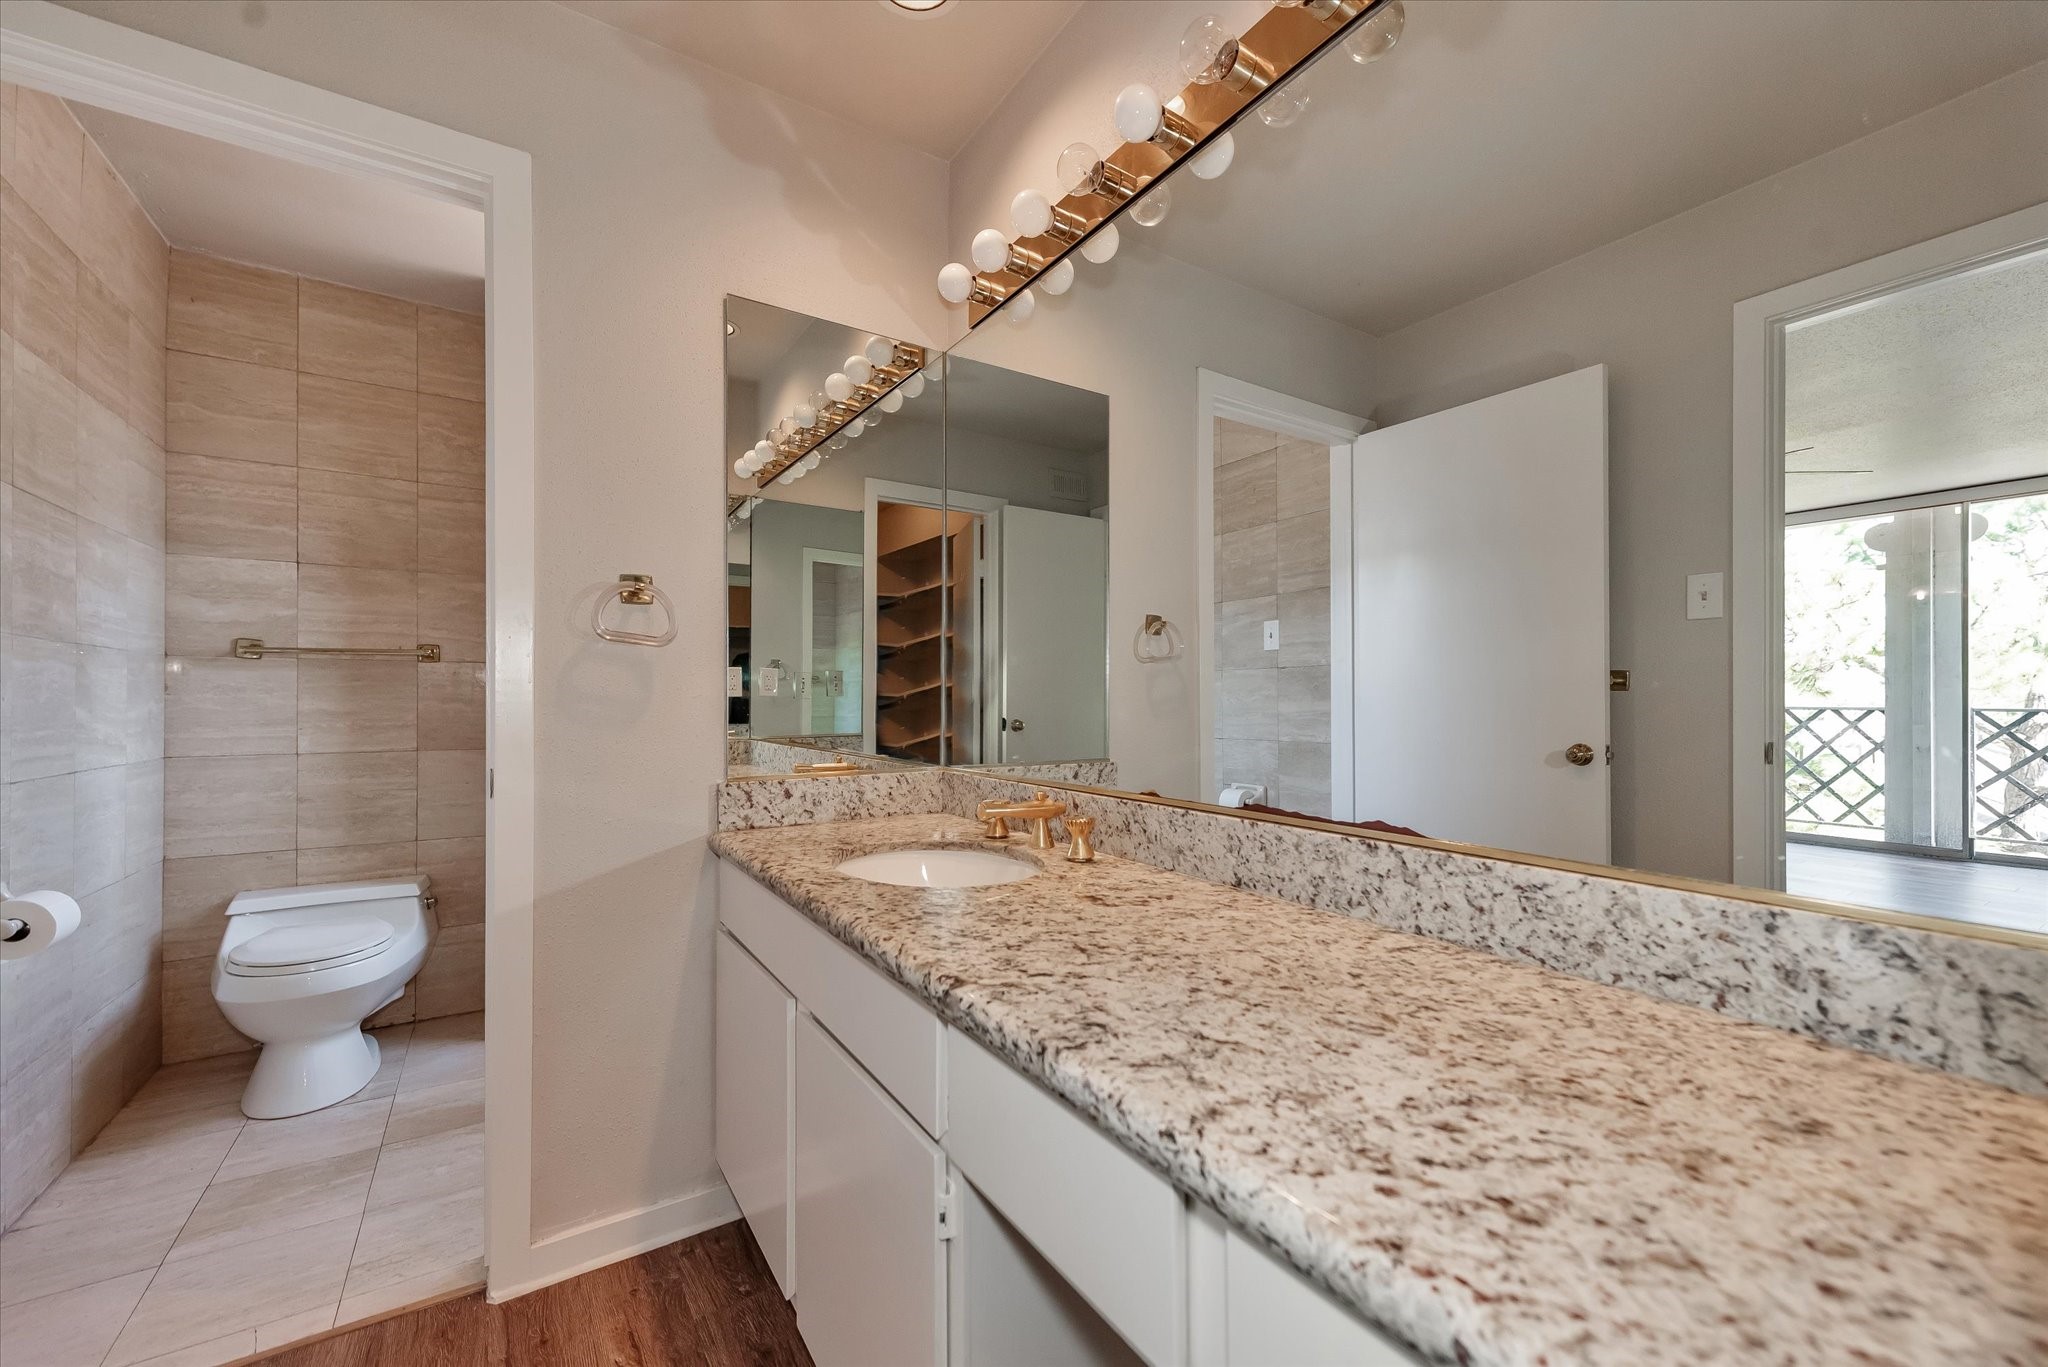 Primary bath with lovely granite counter and huge mirror.